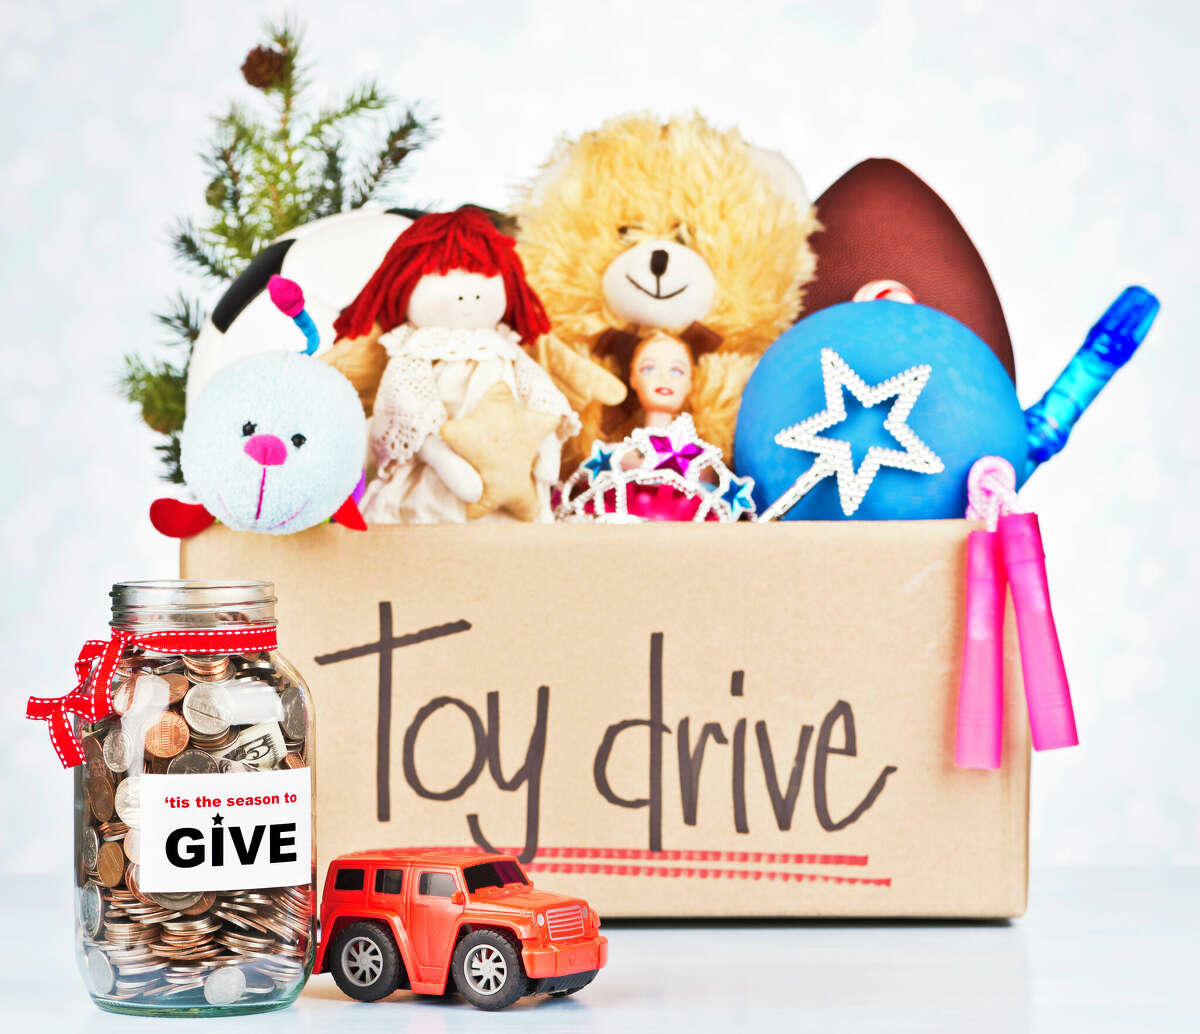 The Roodhouse Fire Protection District is accepting applications for its annual toy drive for Christmas.